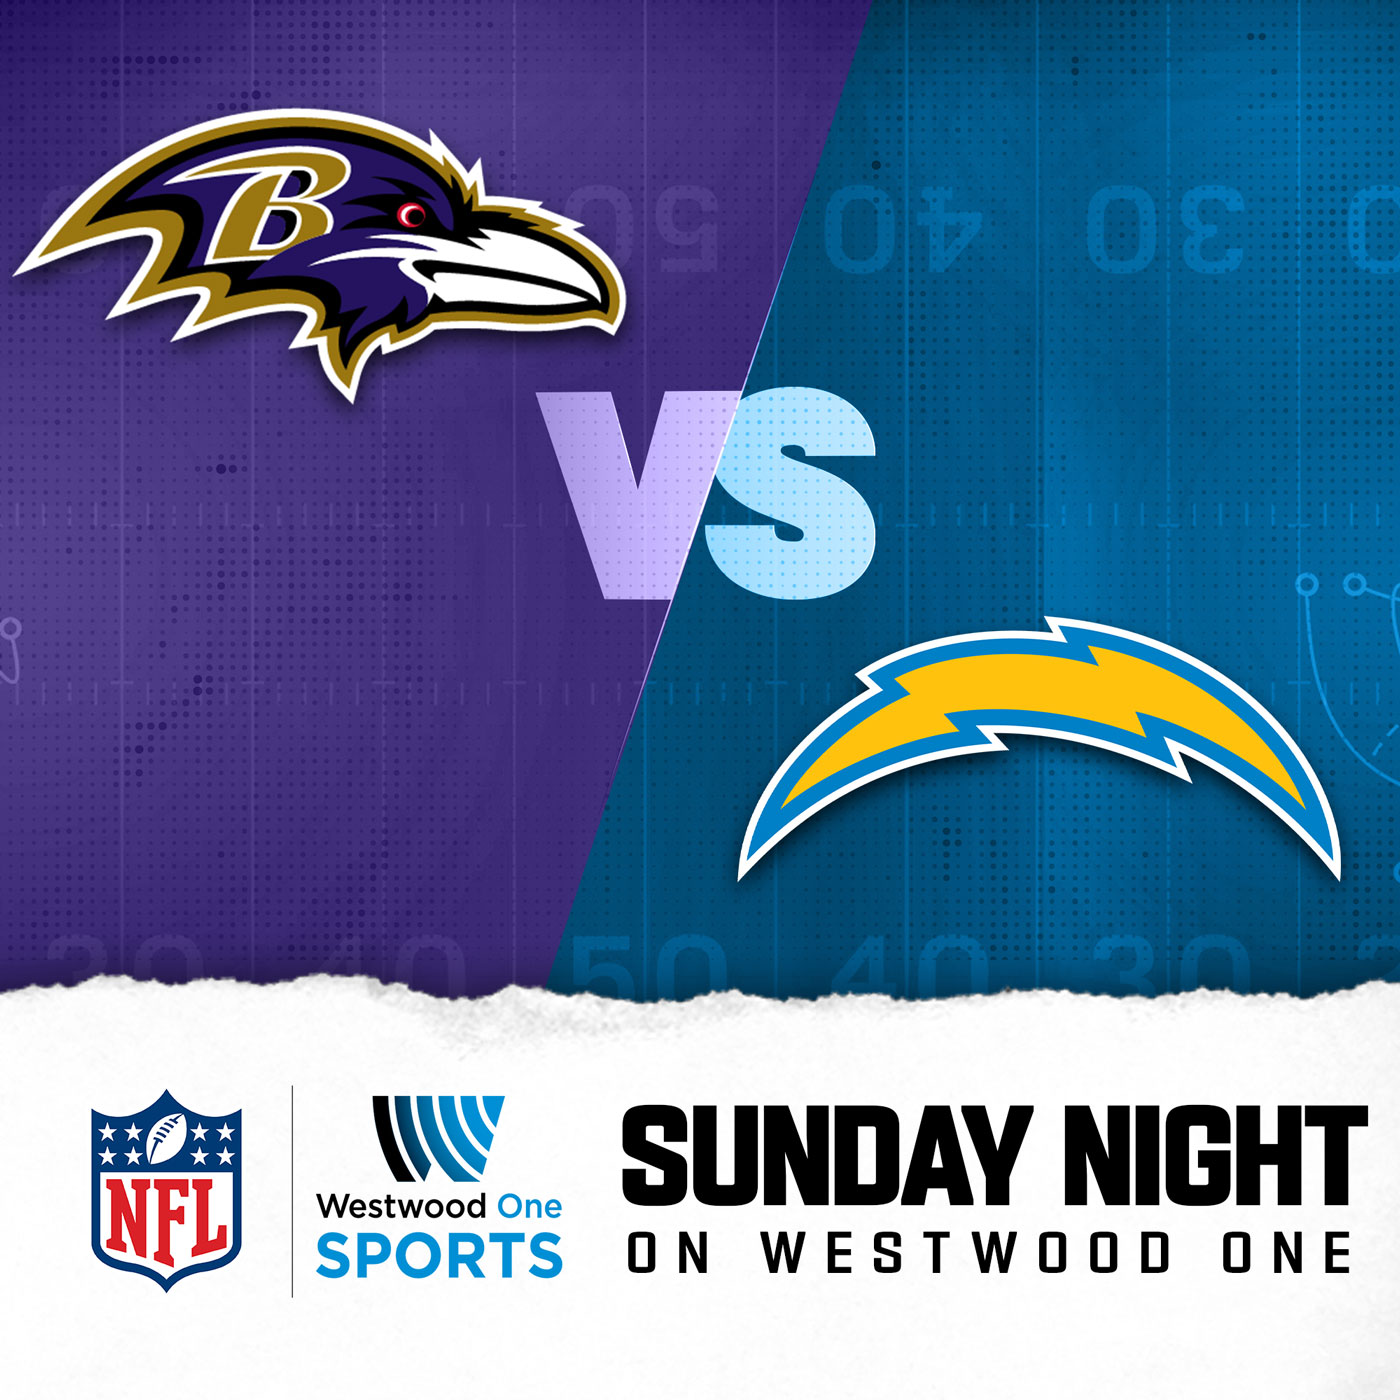 BAL 13-10 Ravens Stop Chargers on 4th Down